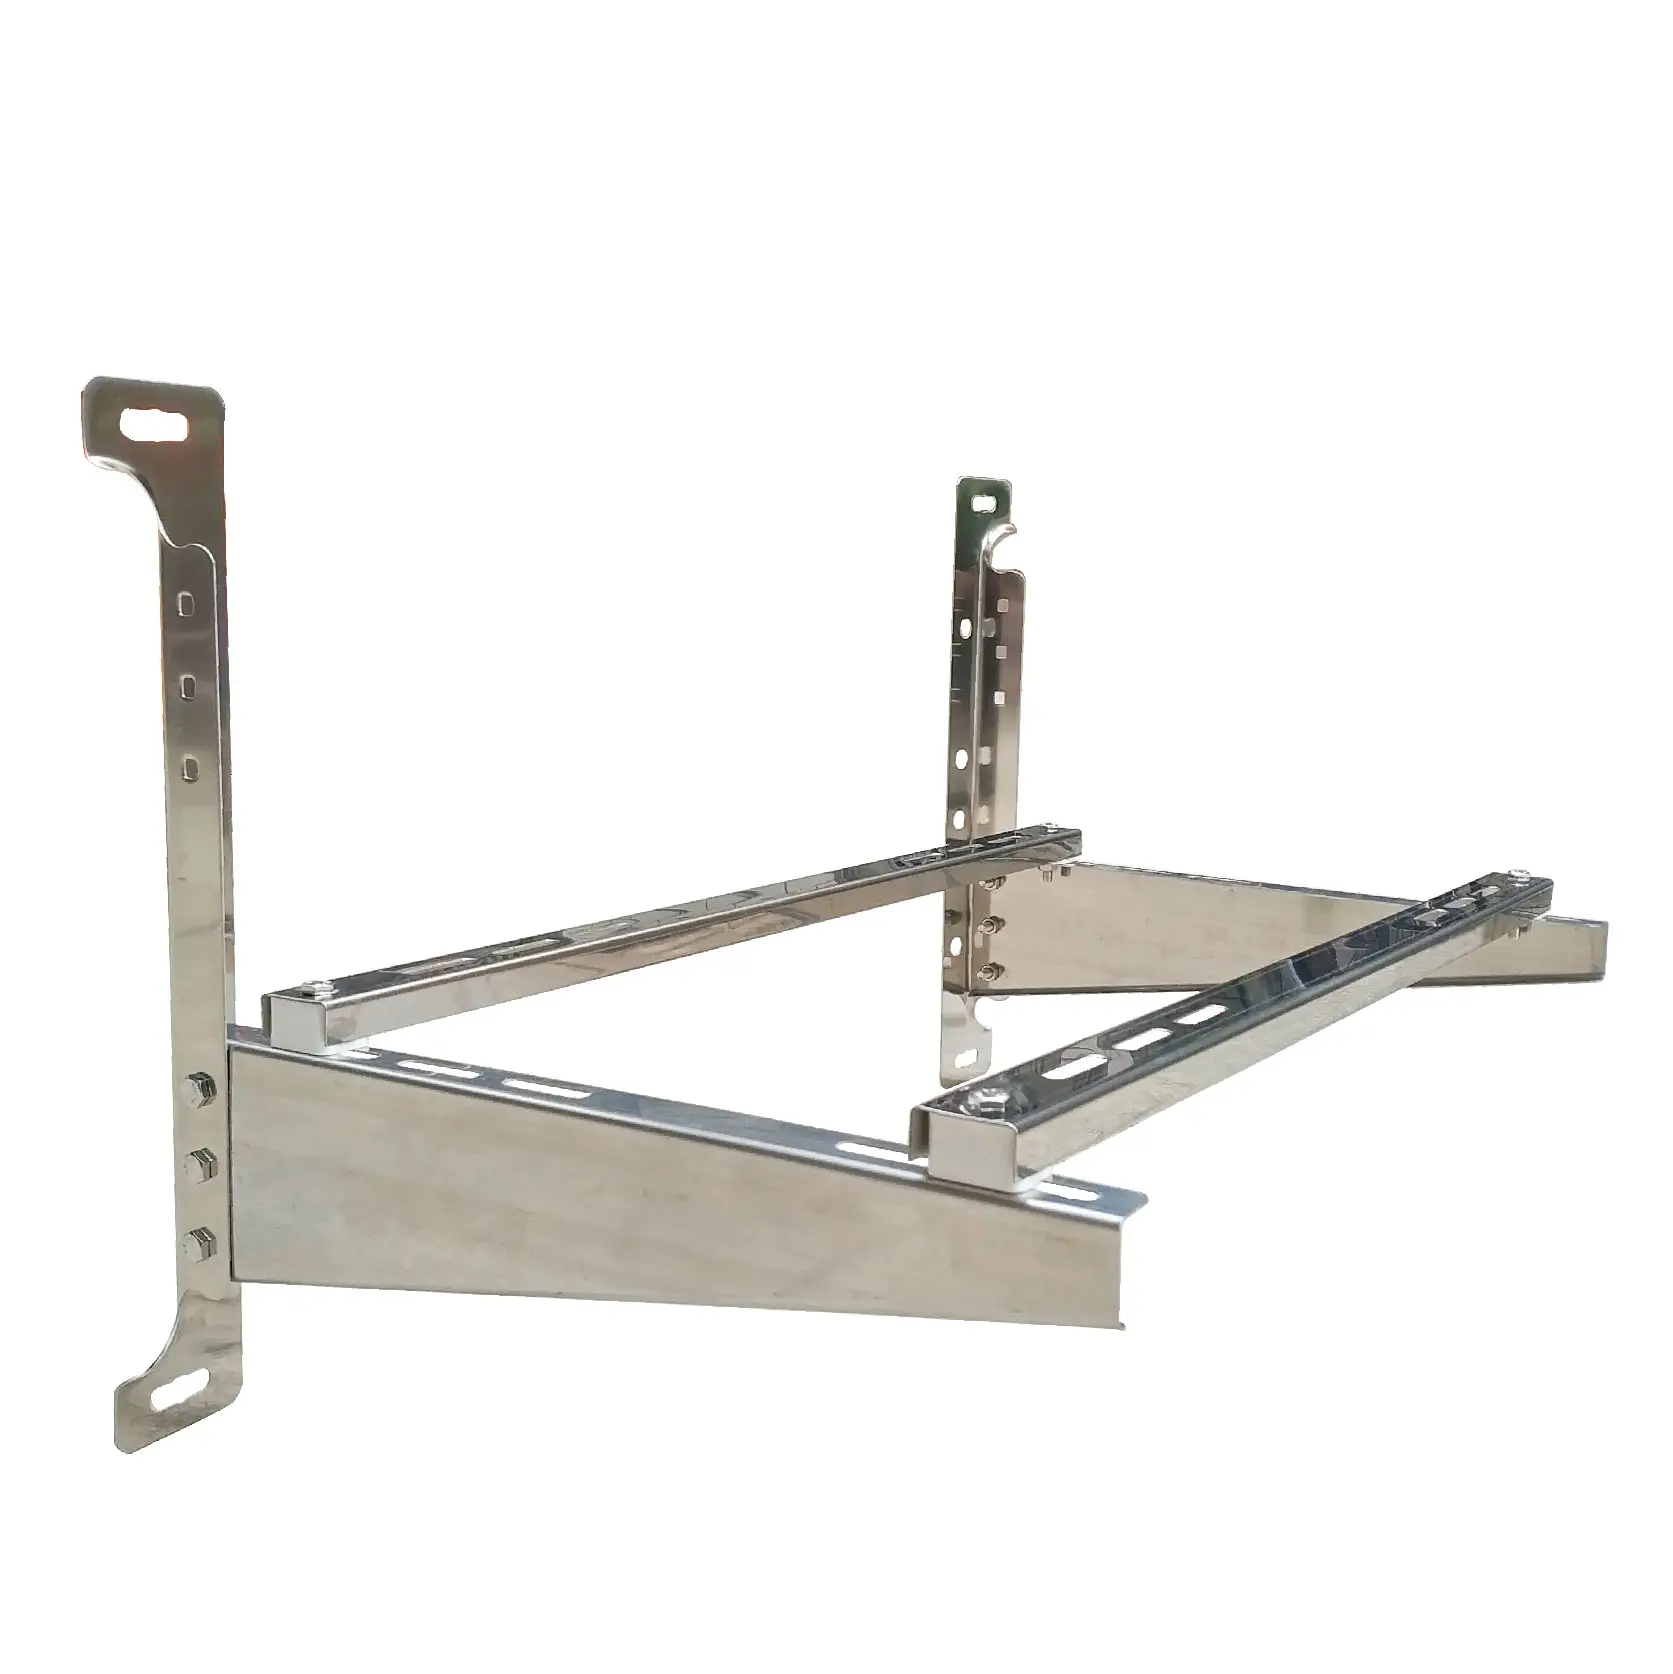 Air condition High quality Stainless steel Support Bracket for mounting Outdoor A/C unit for 18000-24000btu 180-250kgs